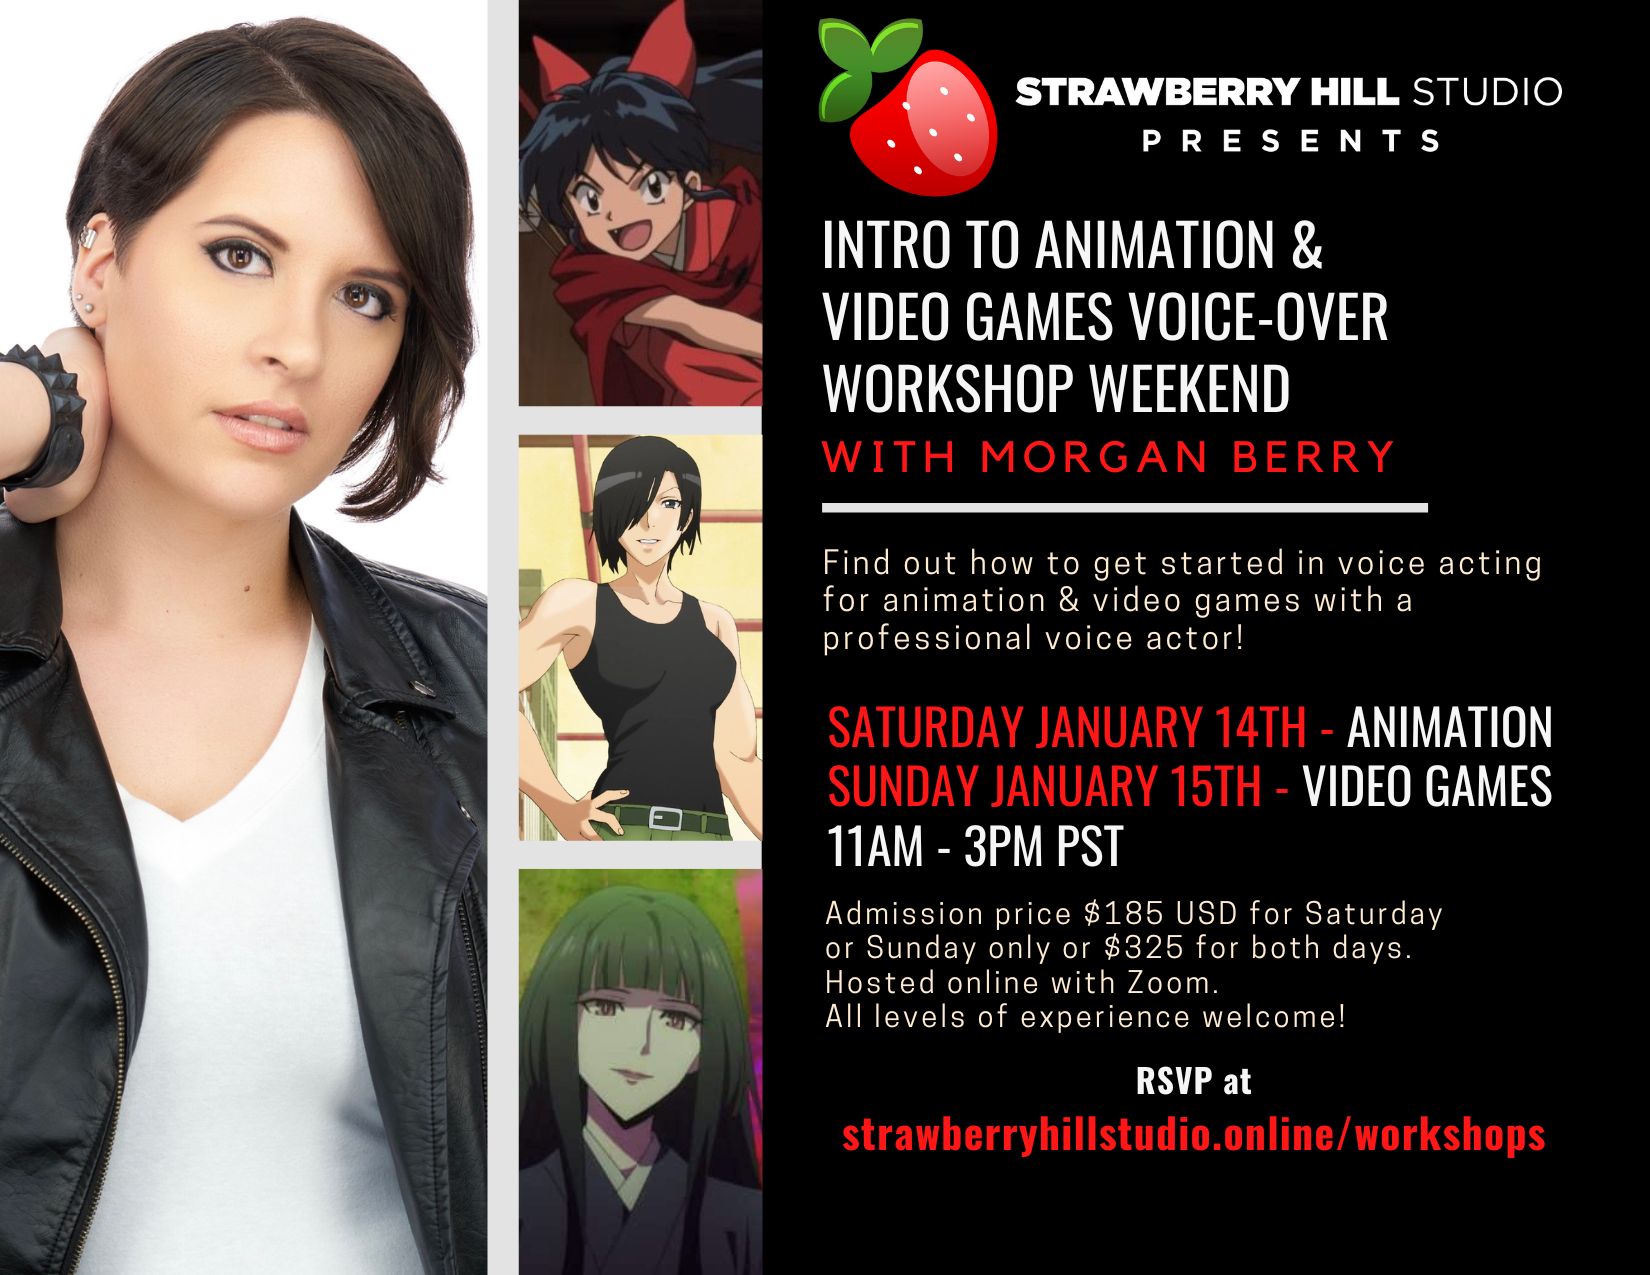 Intro to Animation & Video Games Voice-Over Weekend Workshops w/ Morgan Berry